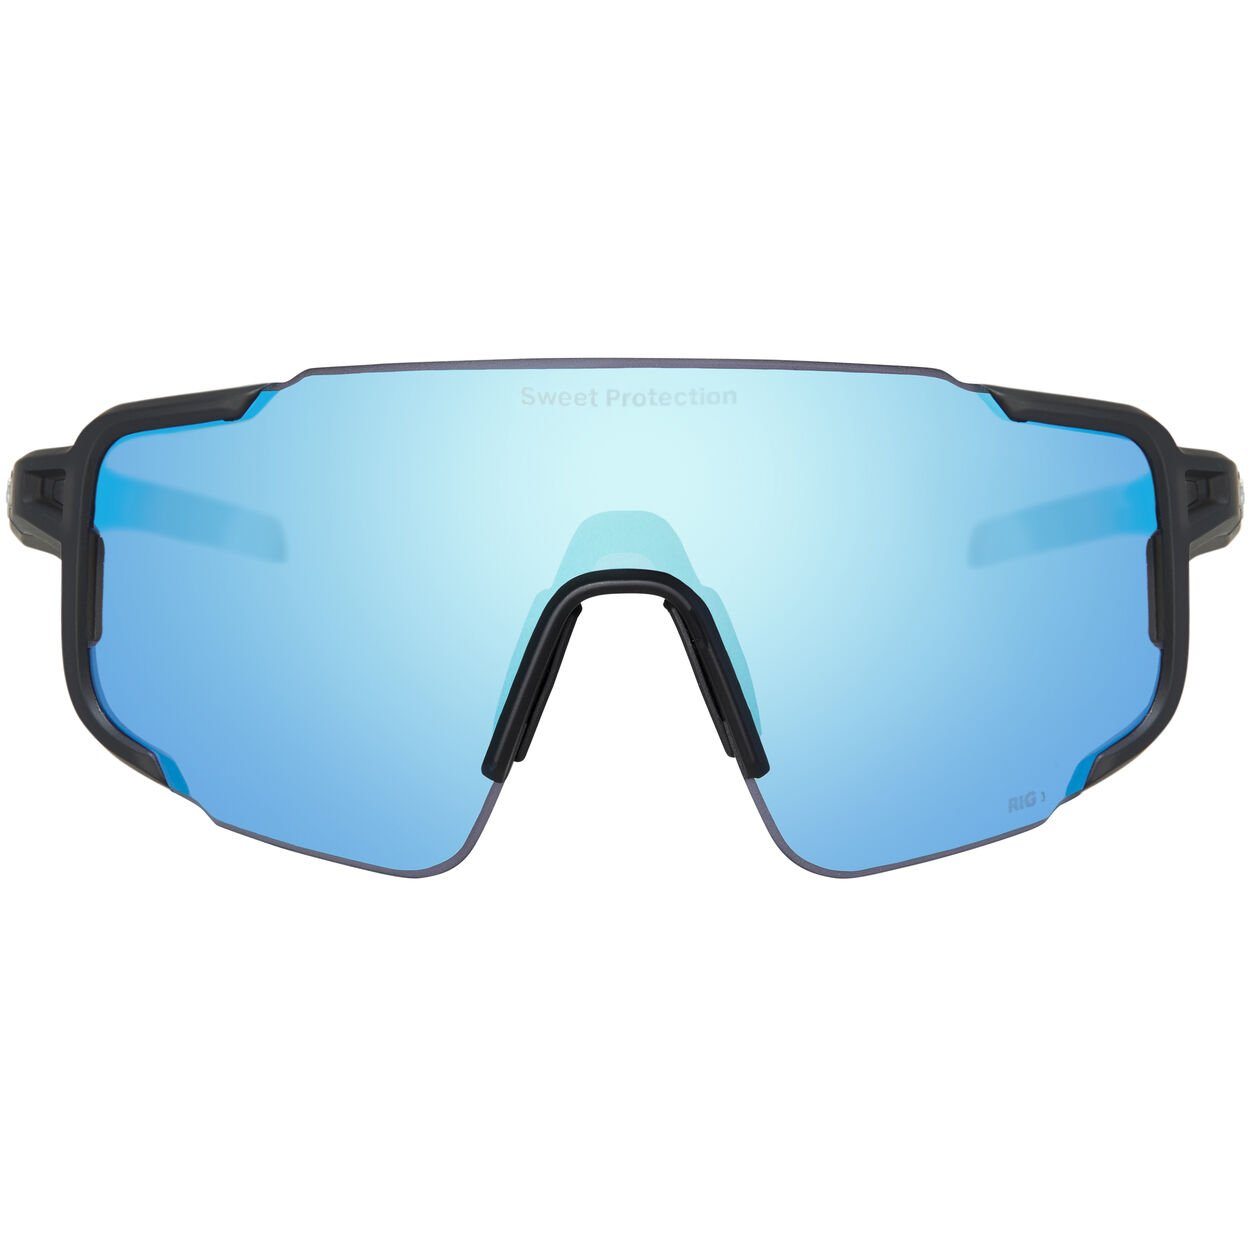 Sweet Protection - Lunettes Ronin Max RIG Reflect Matte Crystal Black Lunettes Sweet Protection 